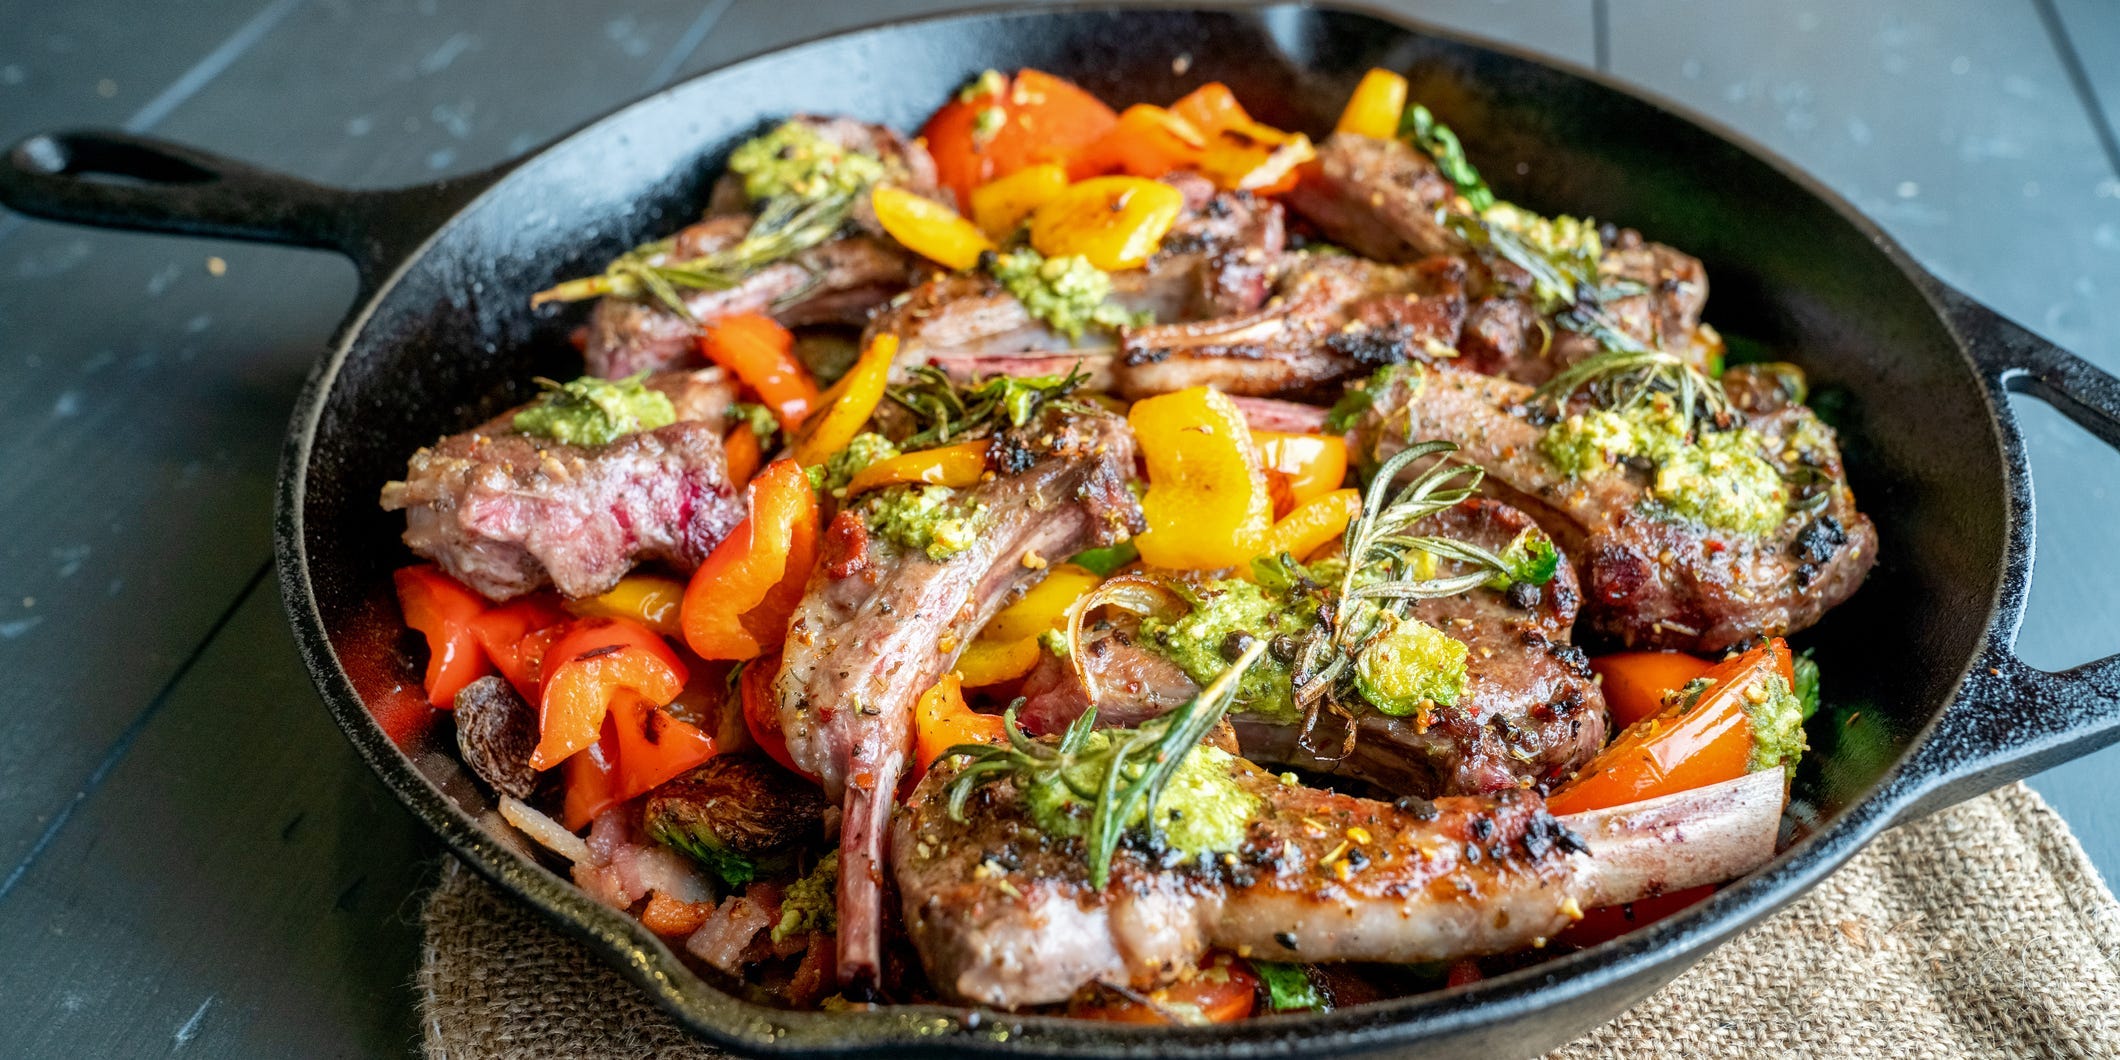 steak and vegetables in a skillet for dinner or lunch